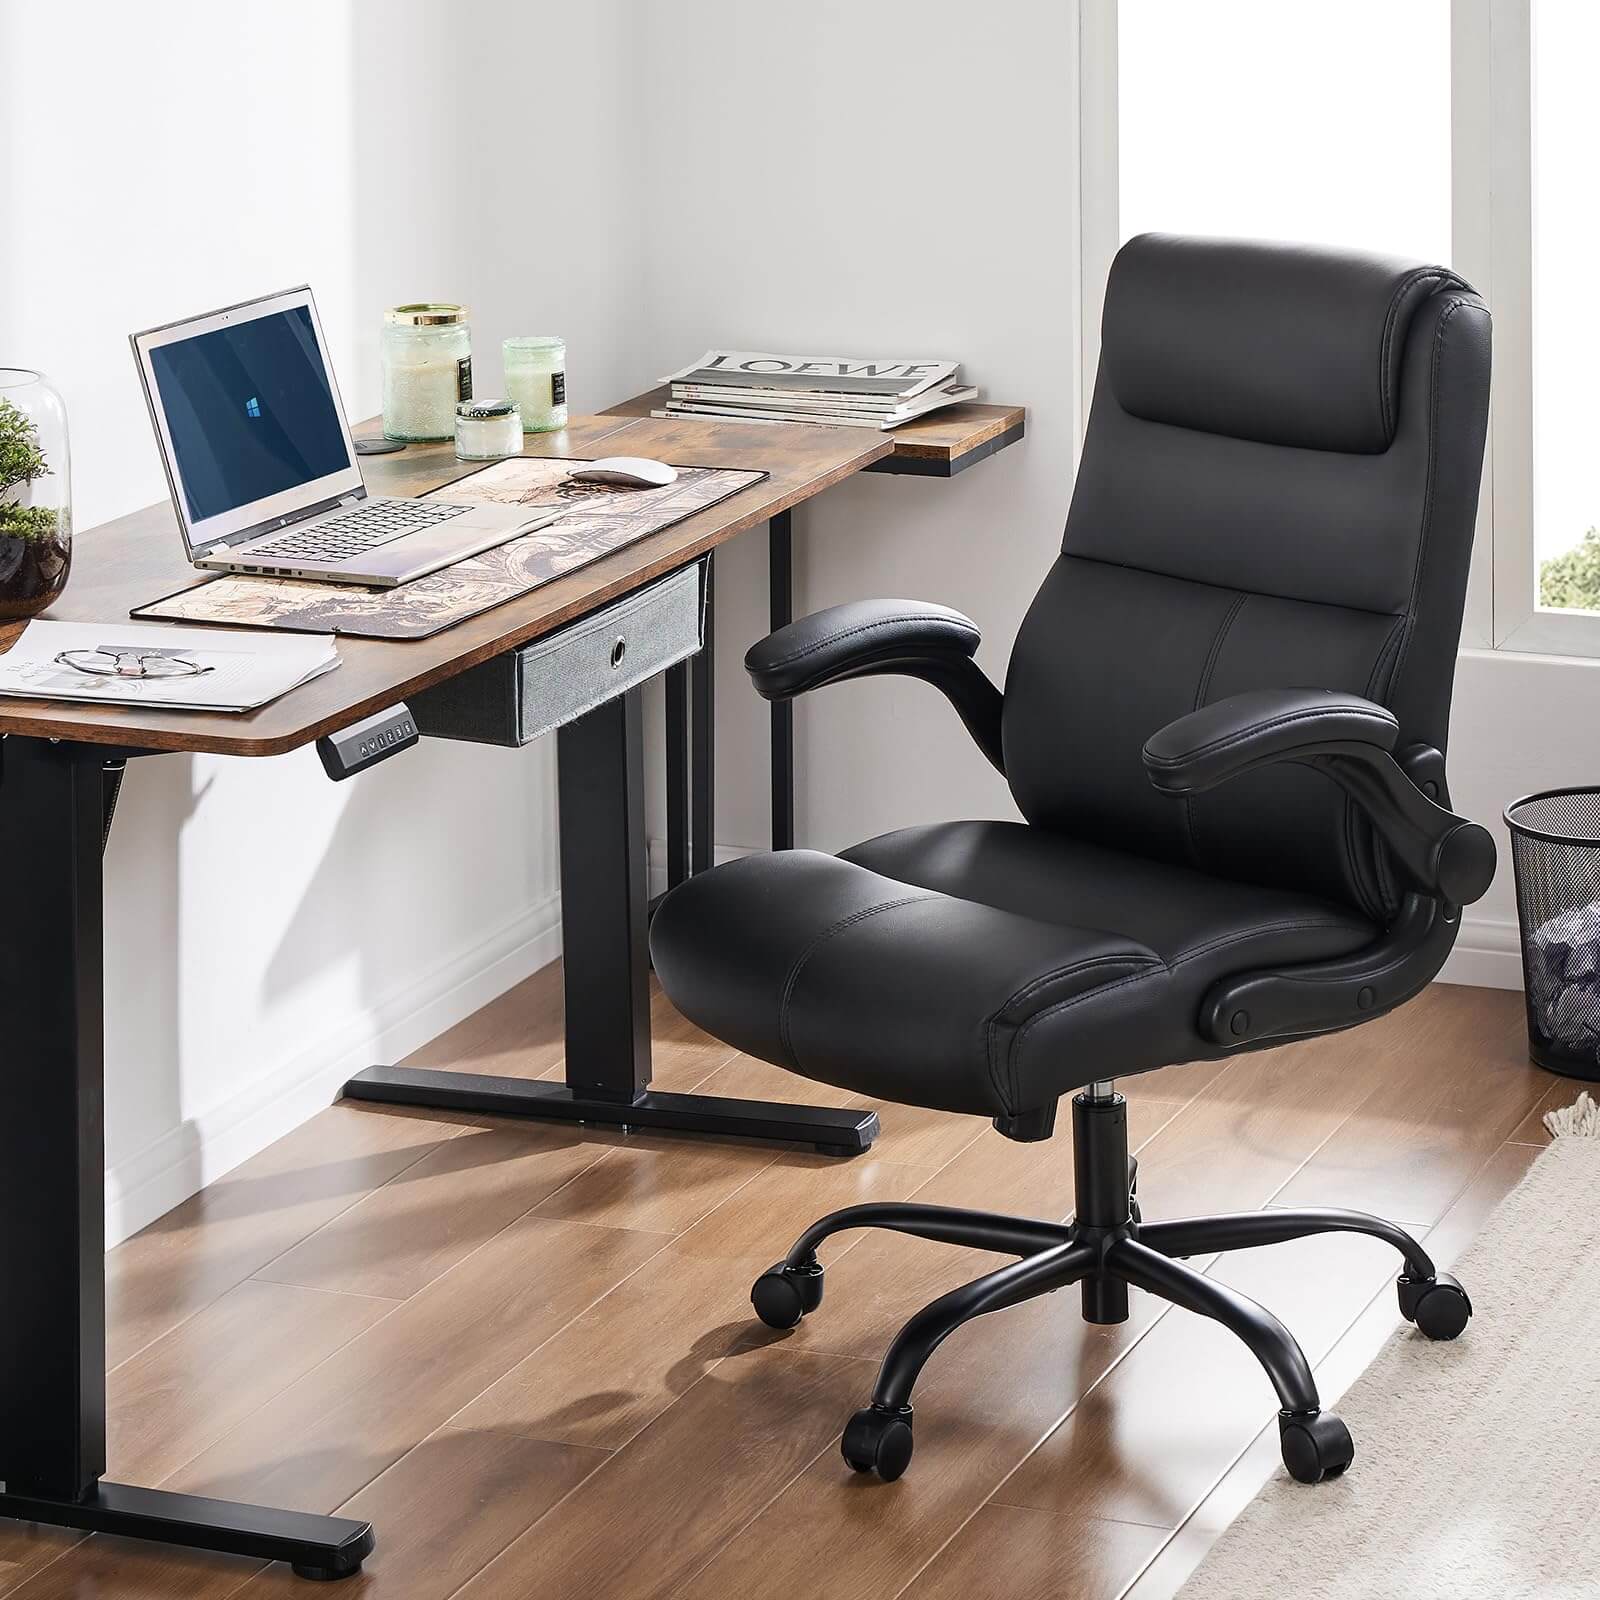 pu-360-swivel-office-chair#Color_Black